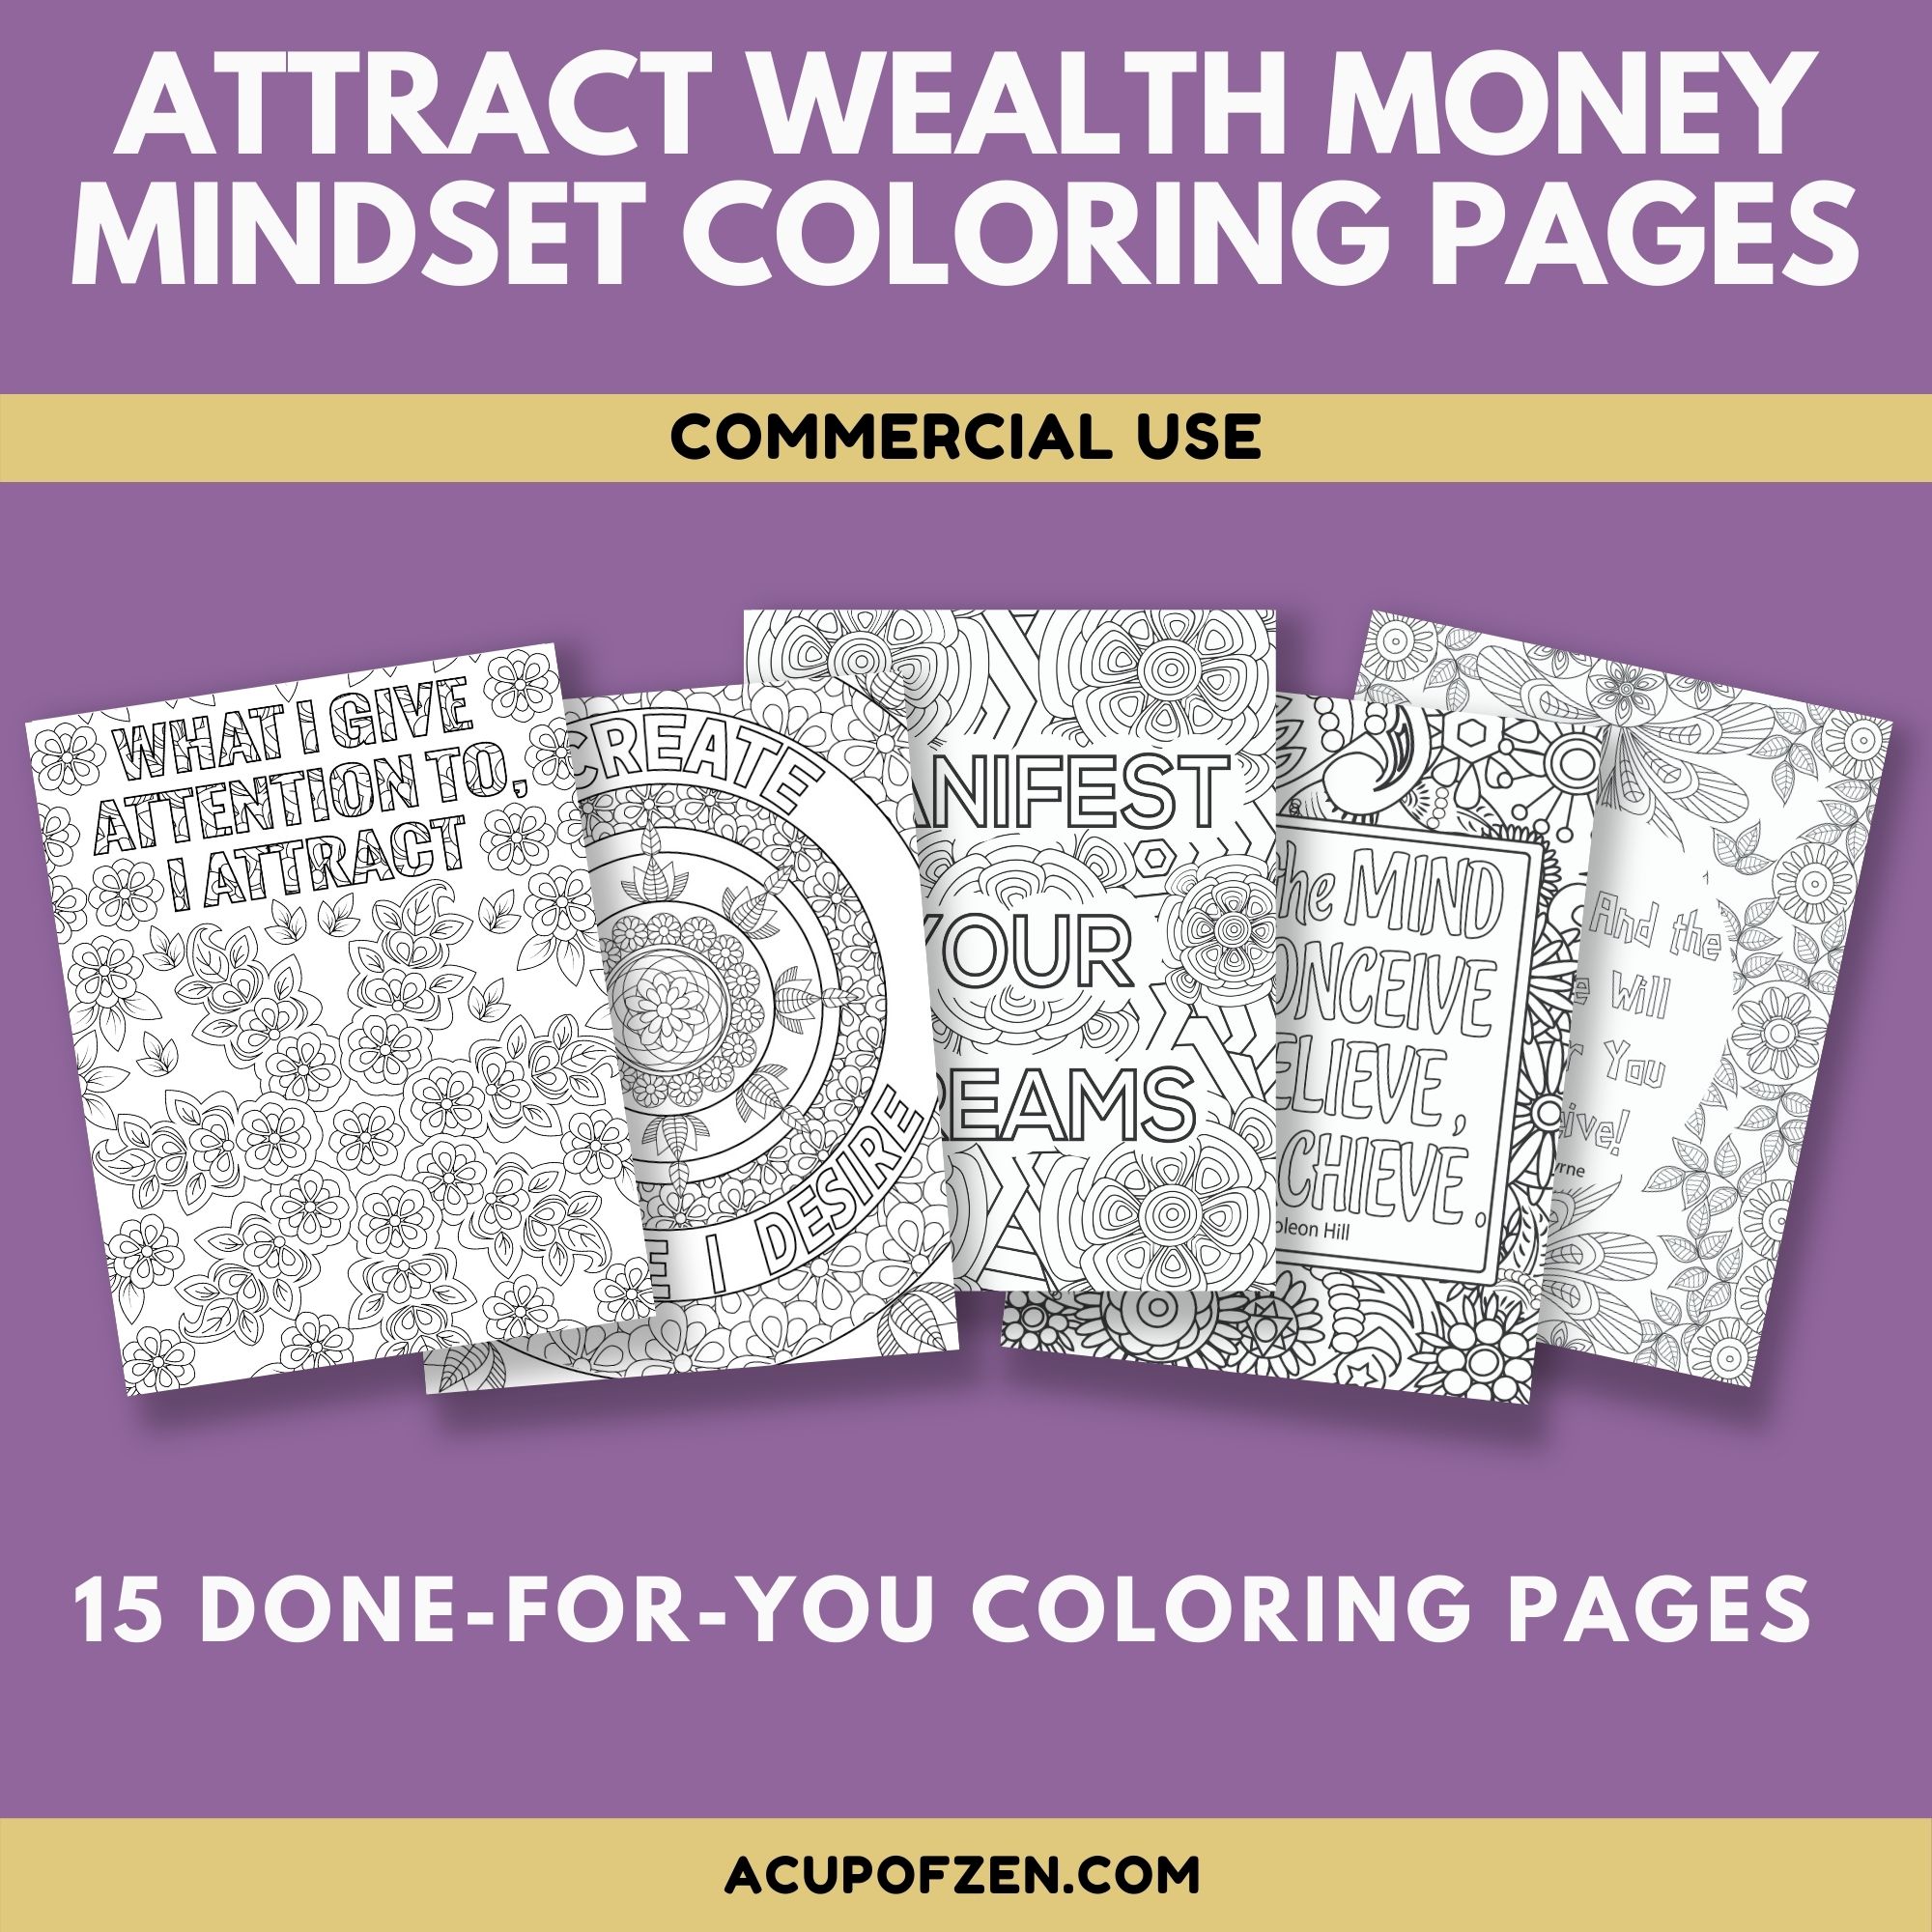 Attract Wealth Money Mindset Coloring Pages with Quotes